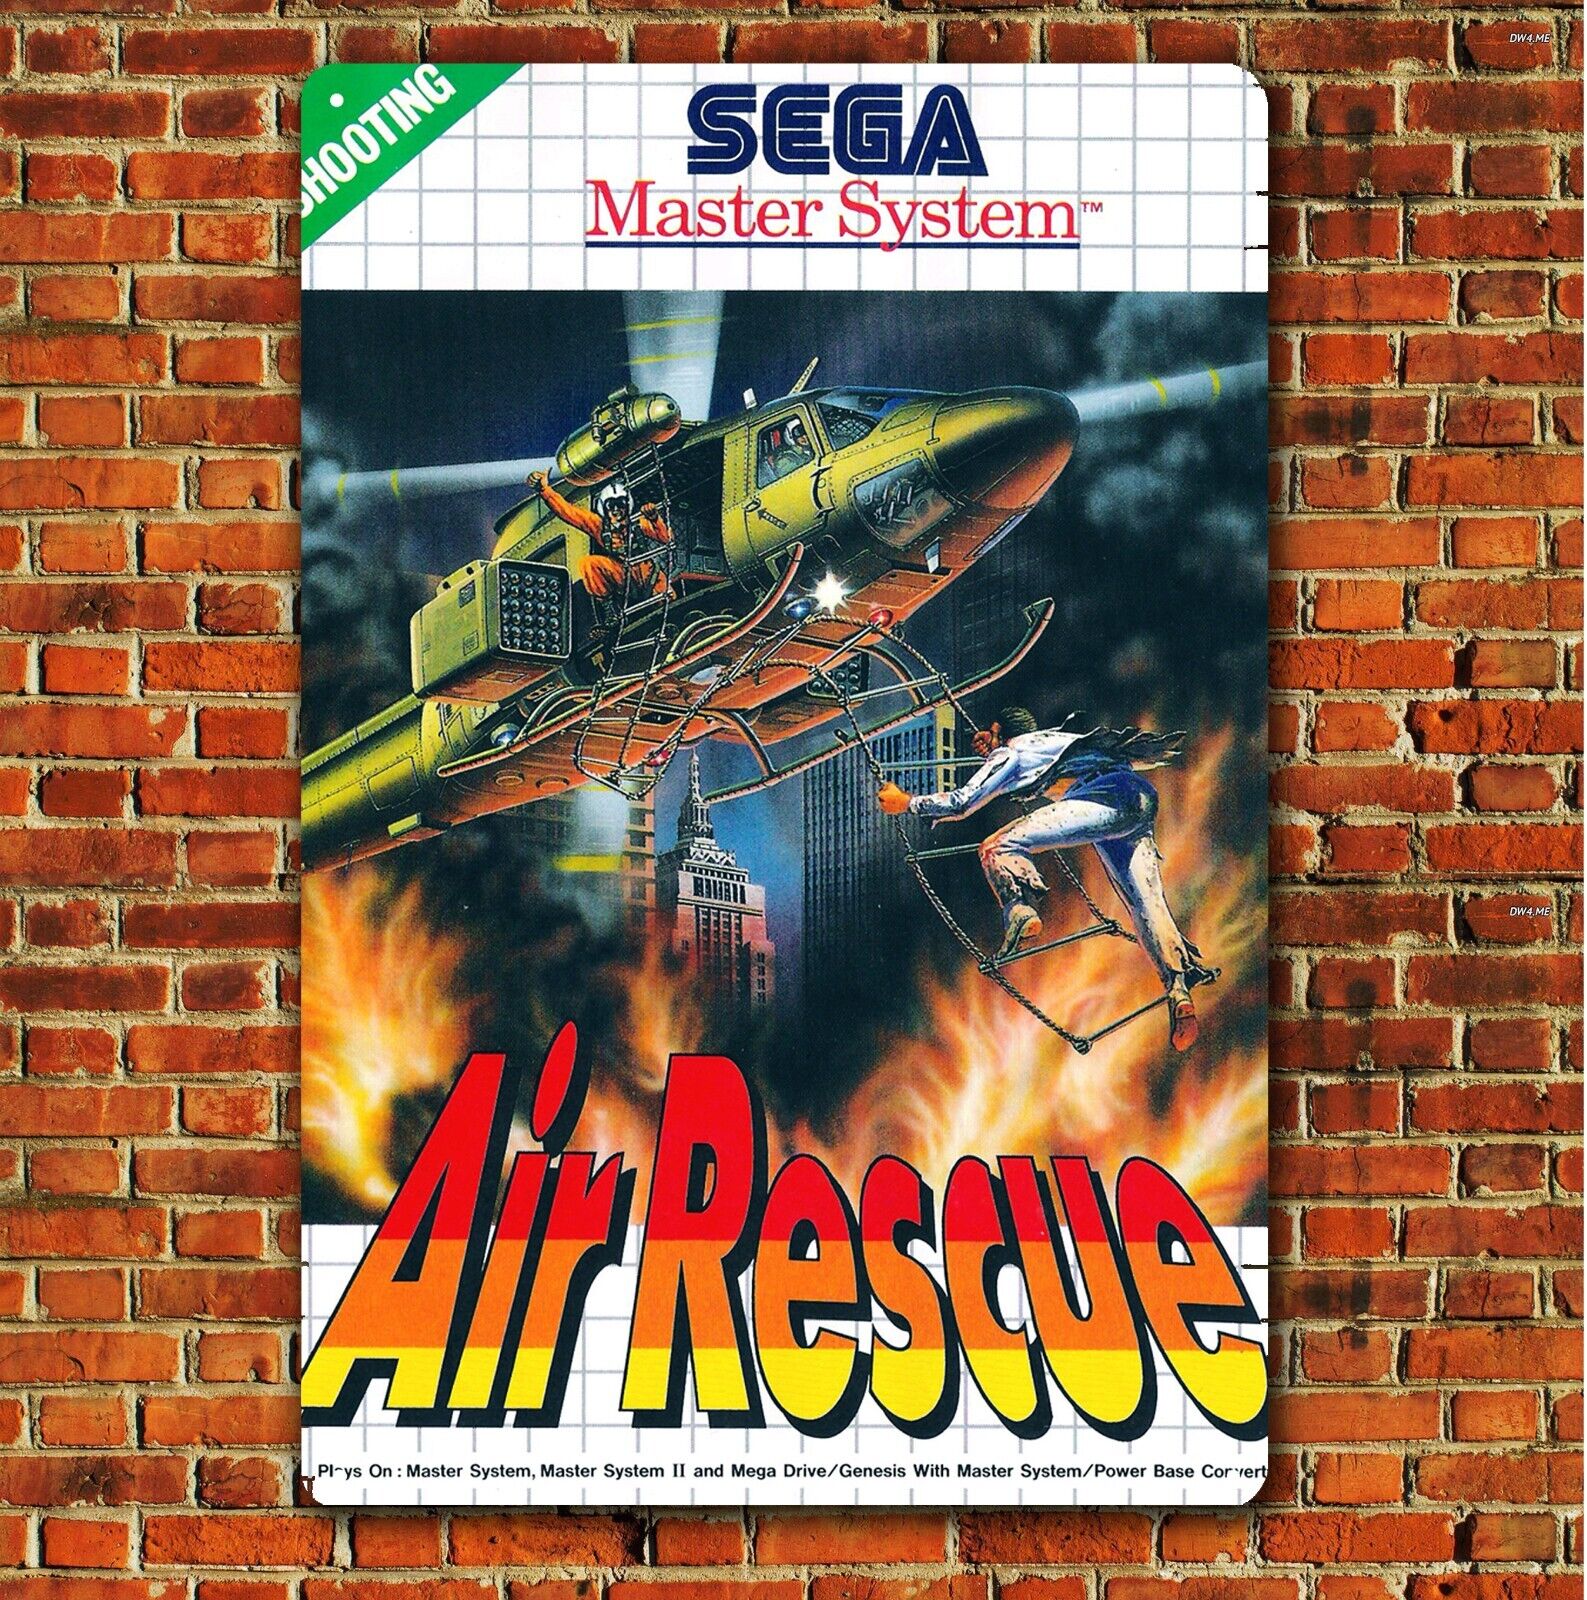 Air Rescue Video Game Metal Poster - Sega Master System Tin Sign (Size 8x12in)